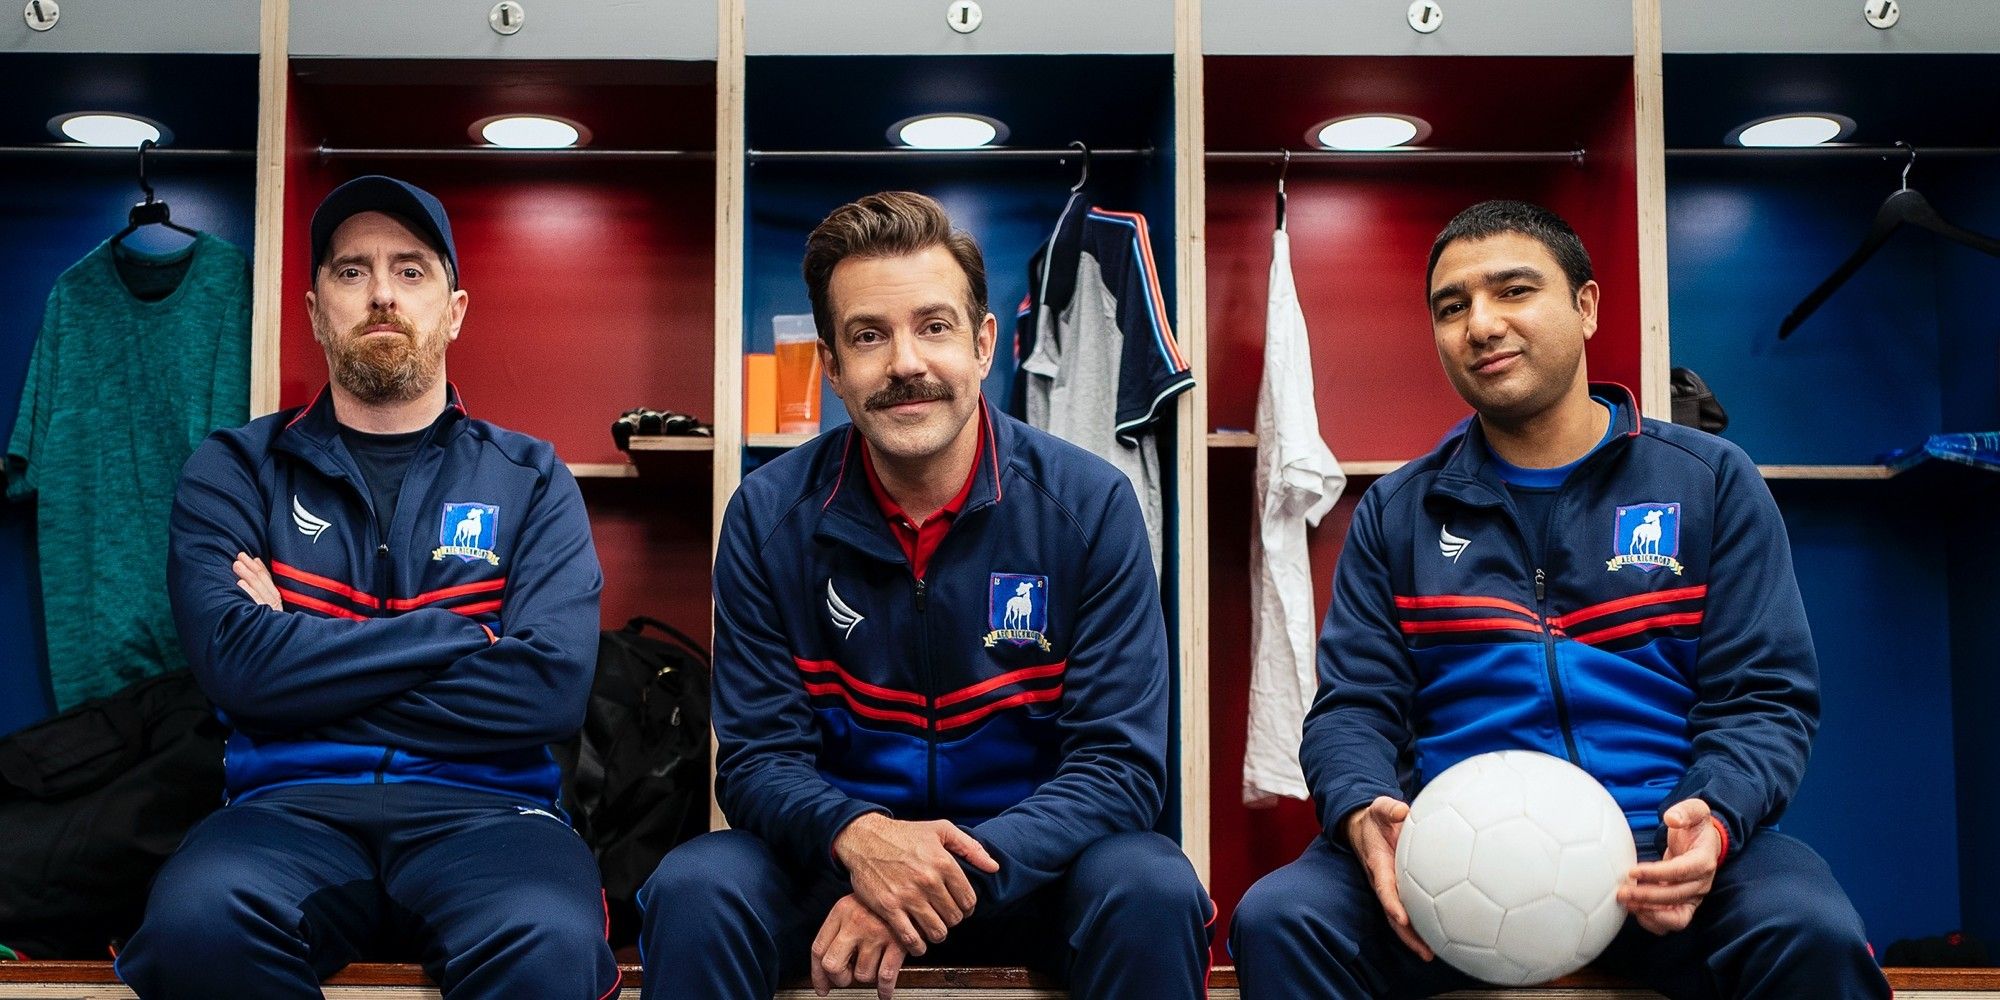 Ted Lassosits in a locker room with two other males in Ted Lasso.